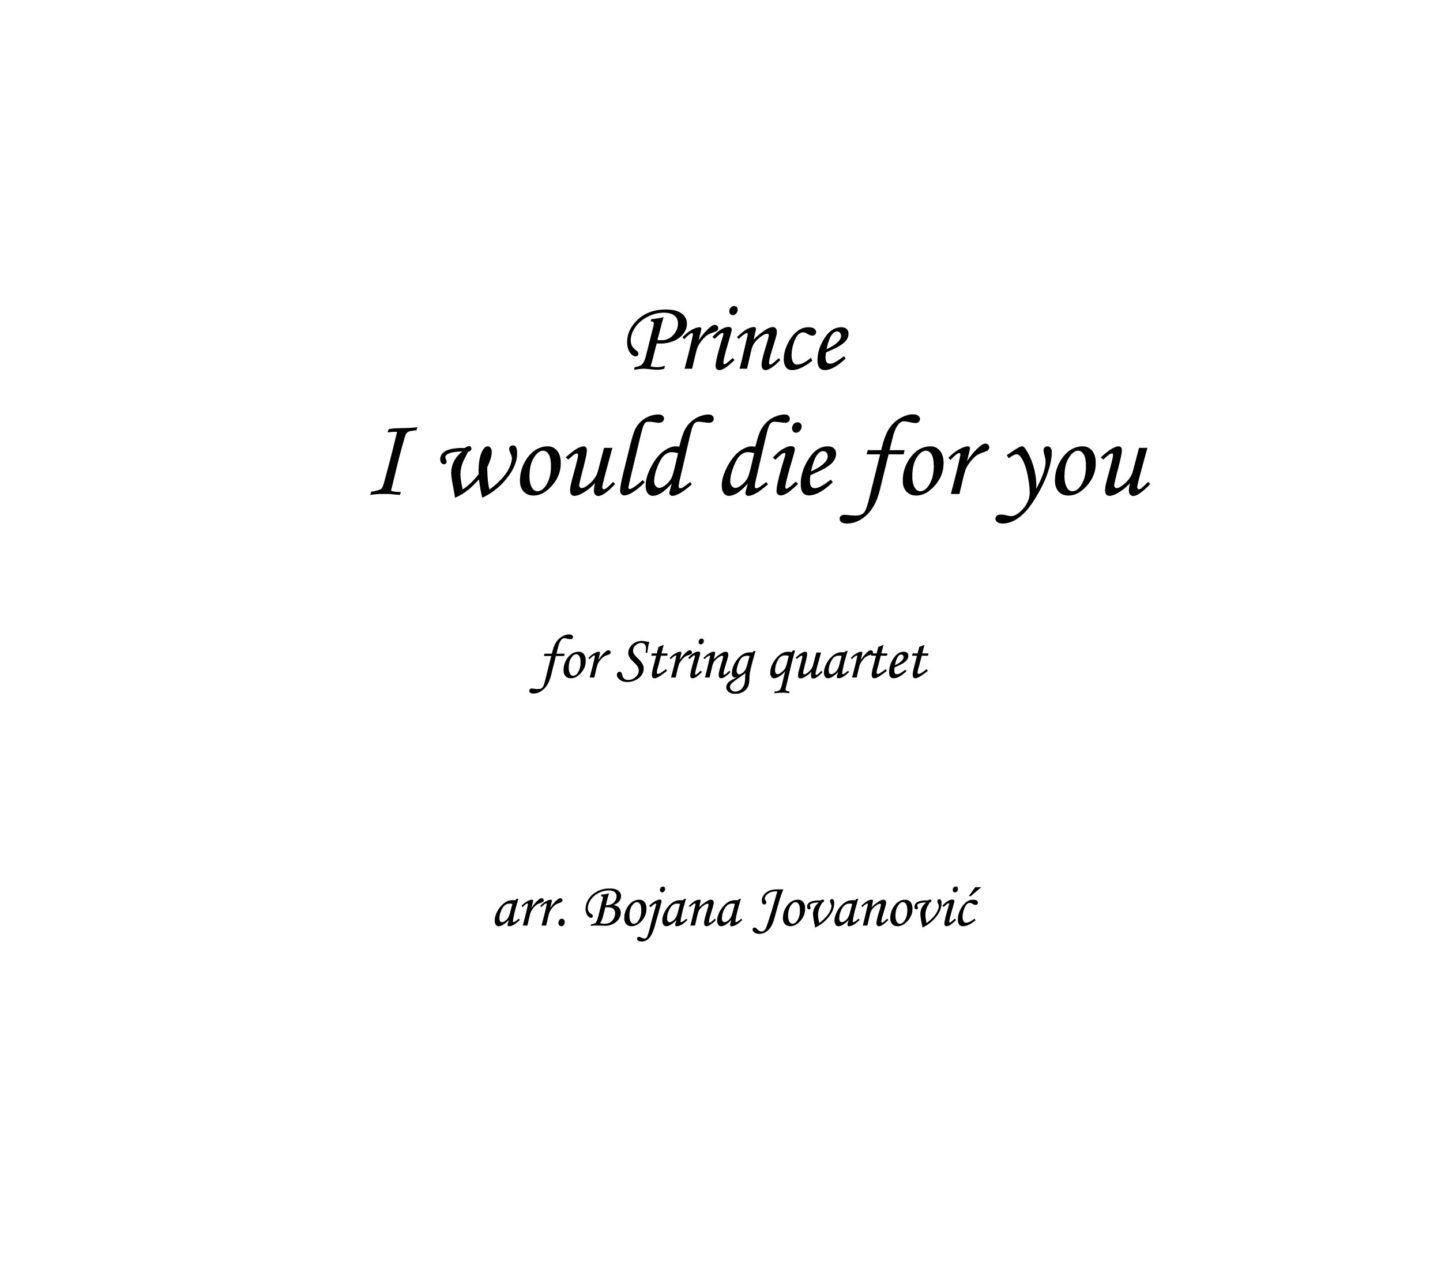 prince song lyrics i would die for you